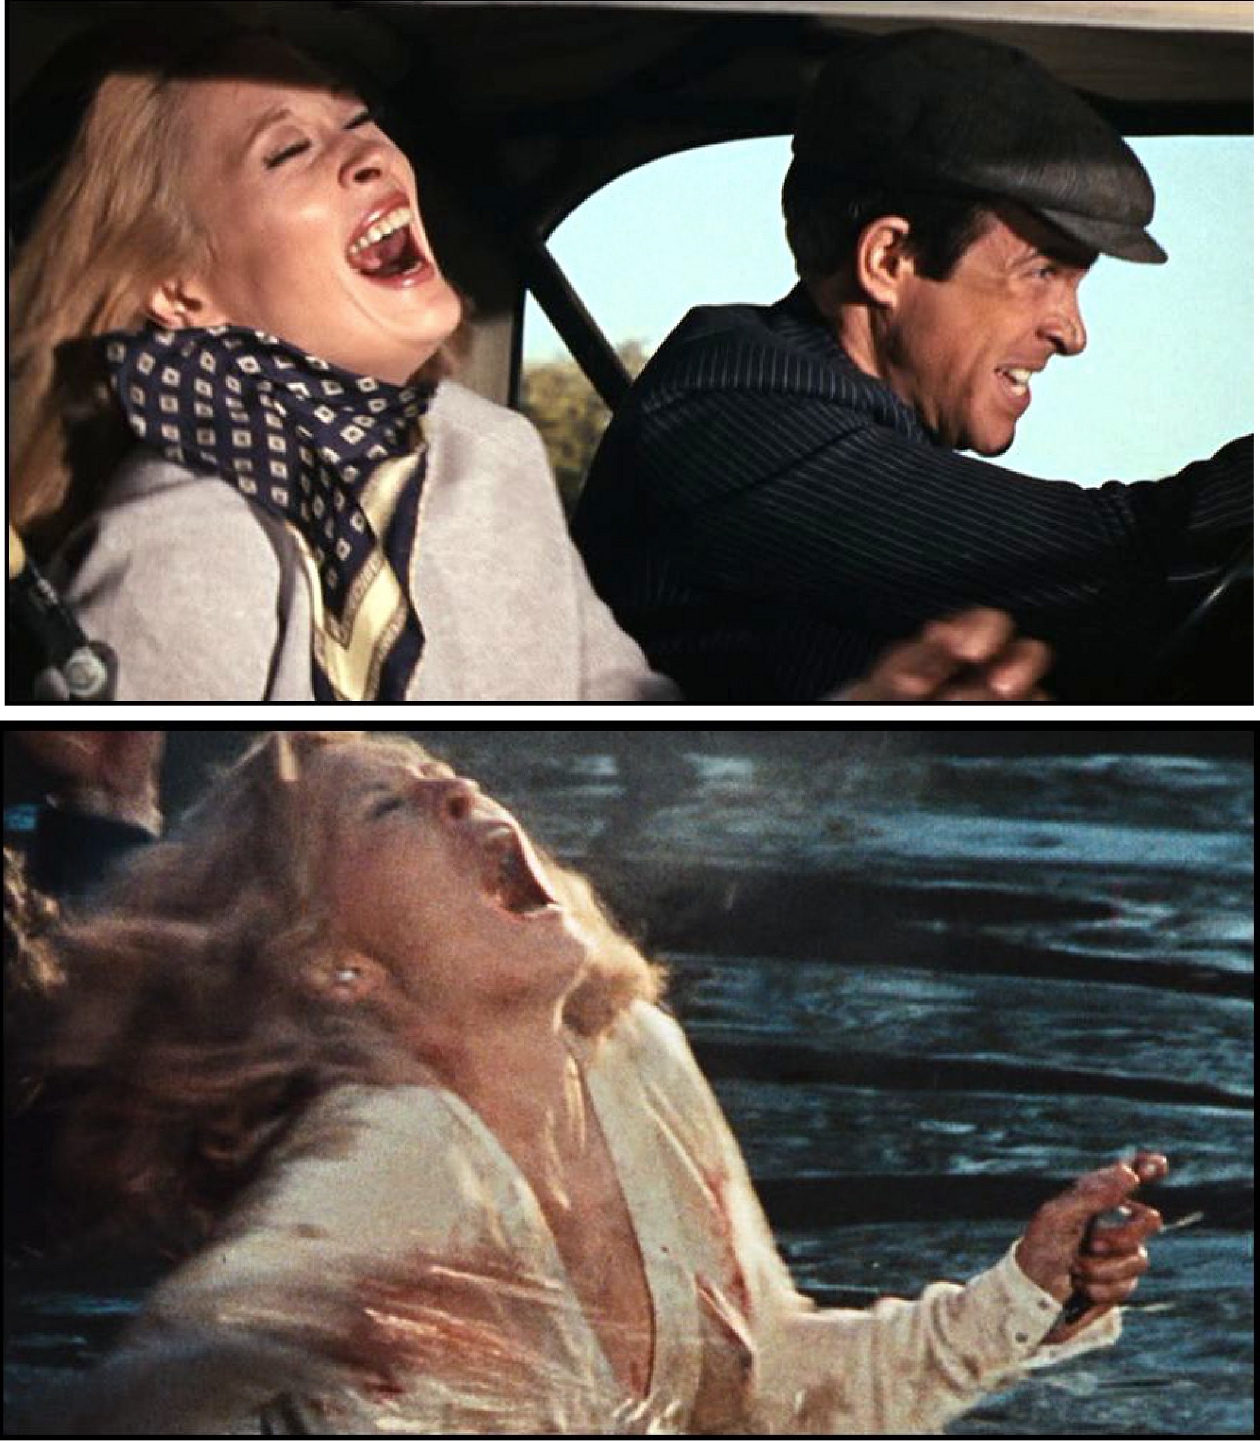 Bonnie & Clyde: Laughing and dying "The killing gets less imperson...